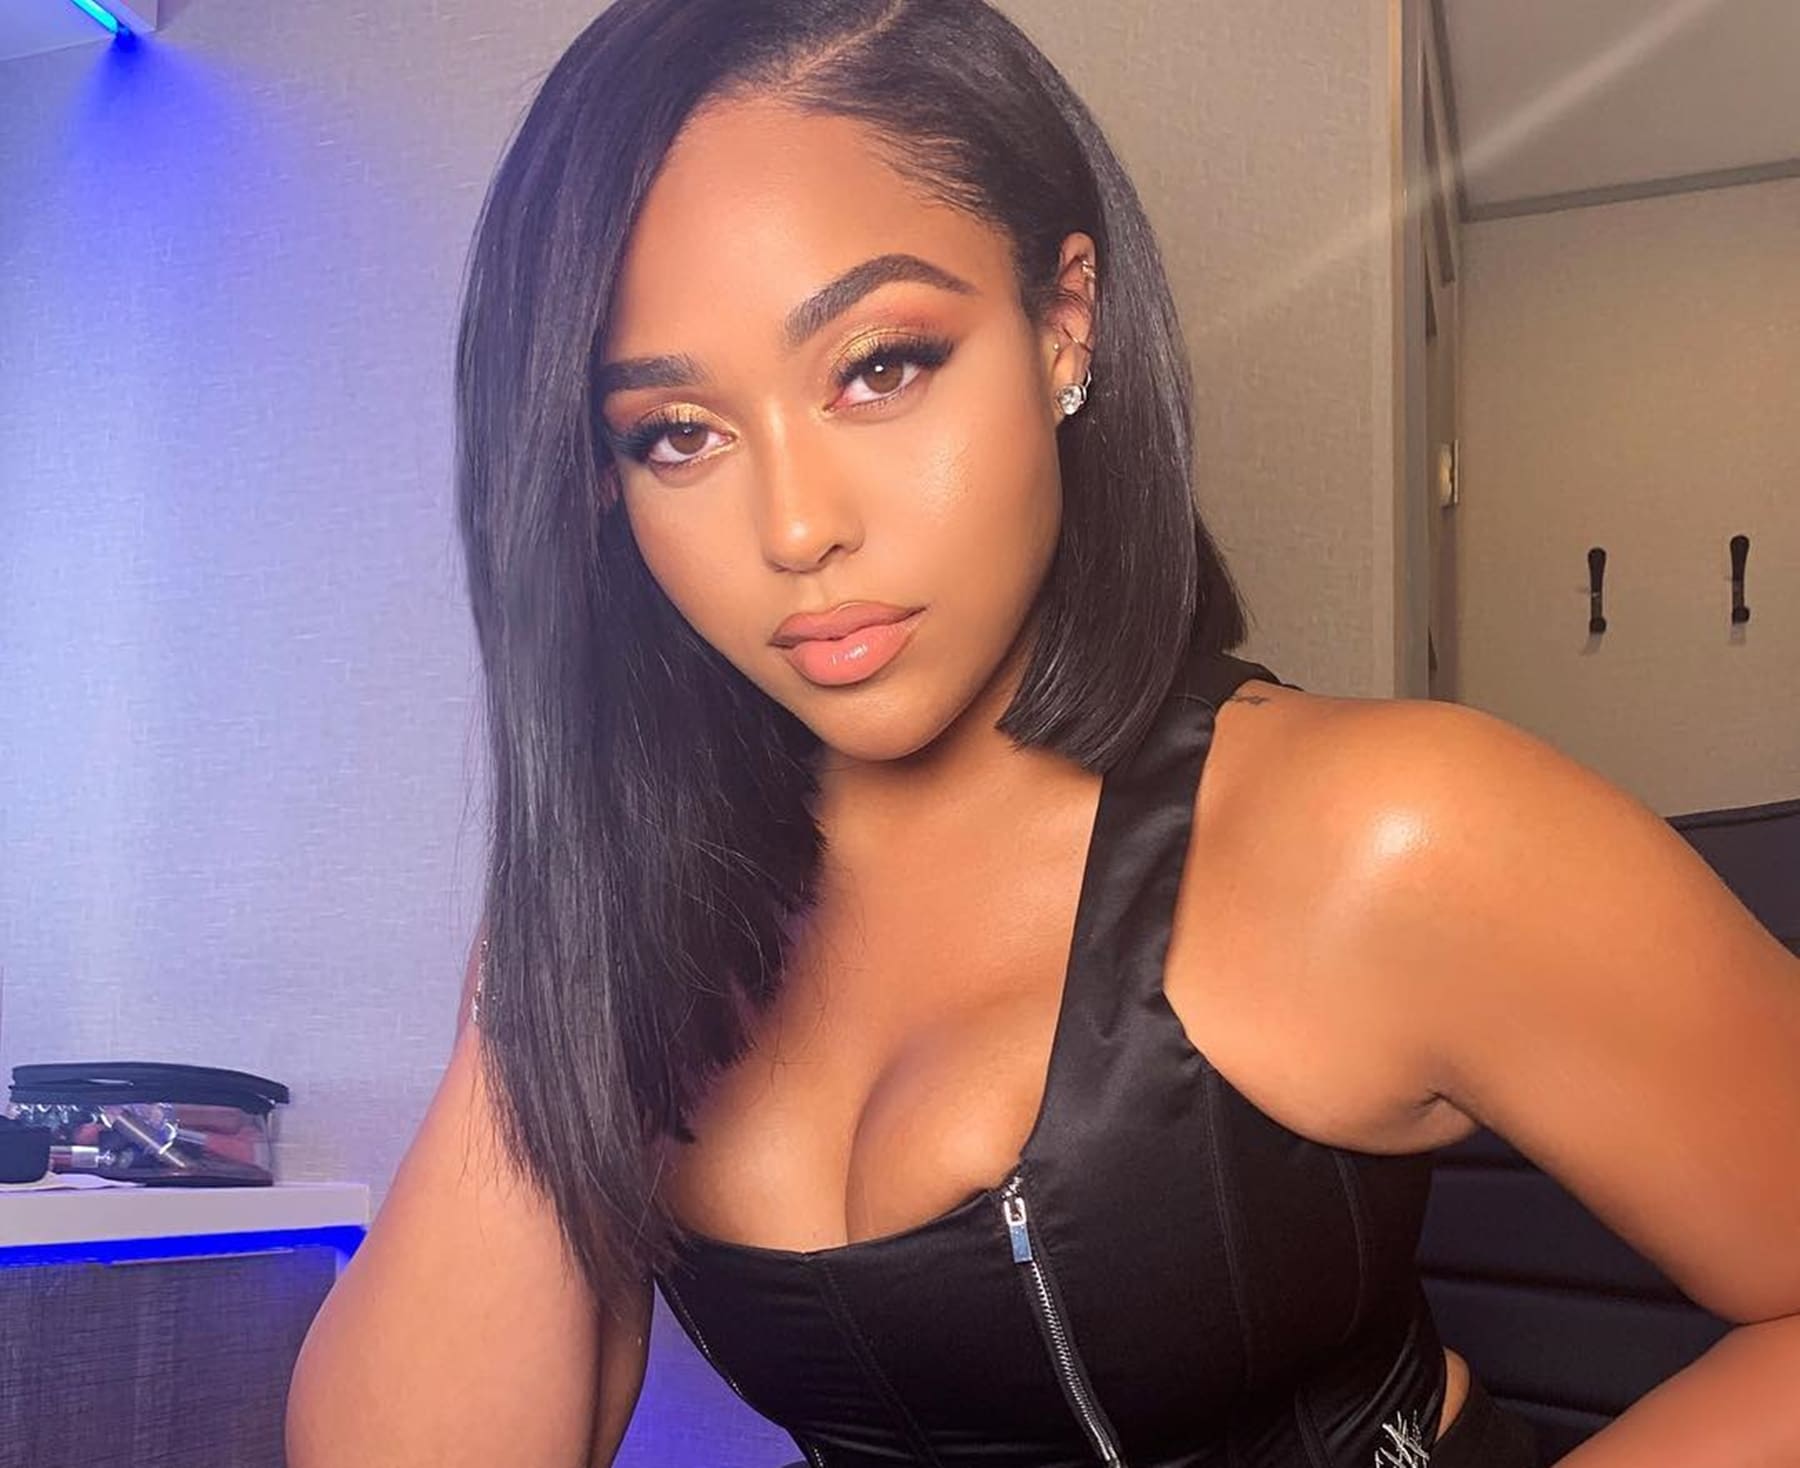 Jordyn Woods Shares An Exciting Video Featuring Her Mom- Check It Out Here